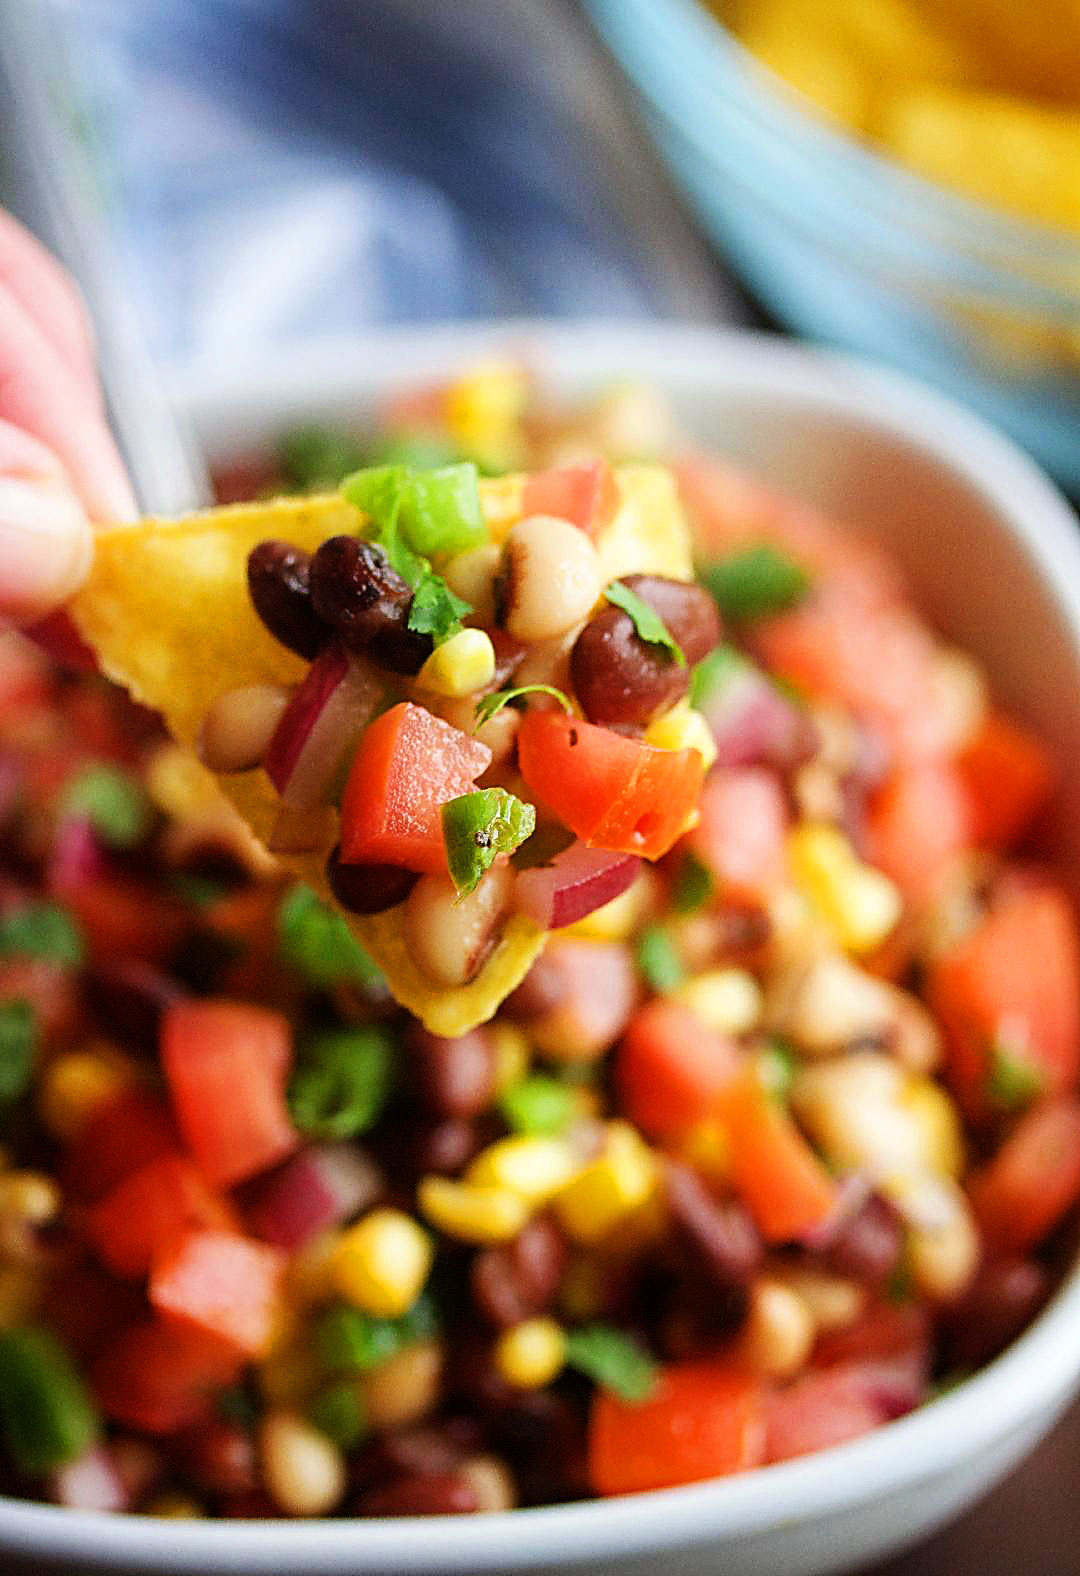 Texas Caviar is loaded with beans and diced fresh veggies tossed in a homemade vinaigrette. Life-in-the-Lofthouse.com